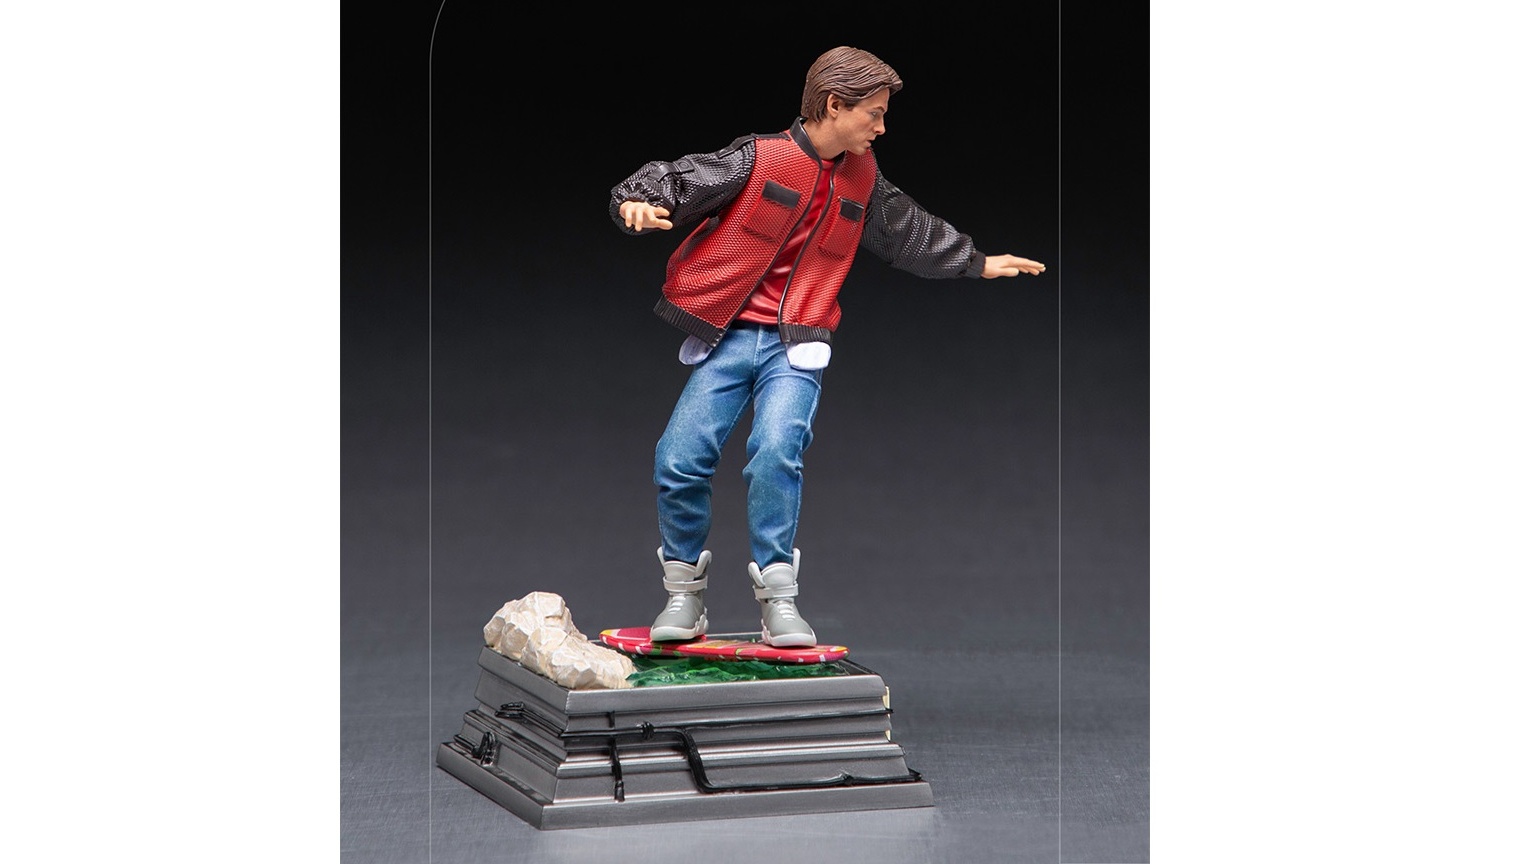 Pre-orders for Marty McFly on Hoverboard statue from Iron Studios open